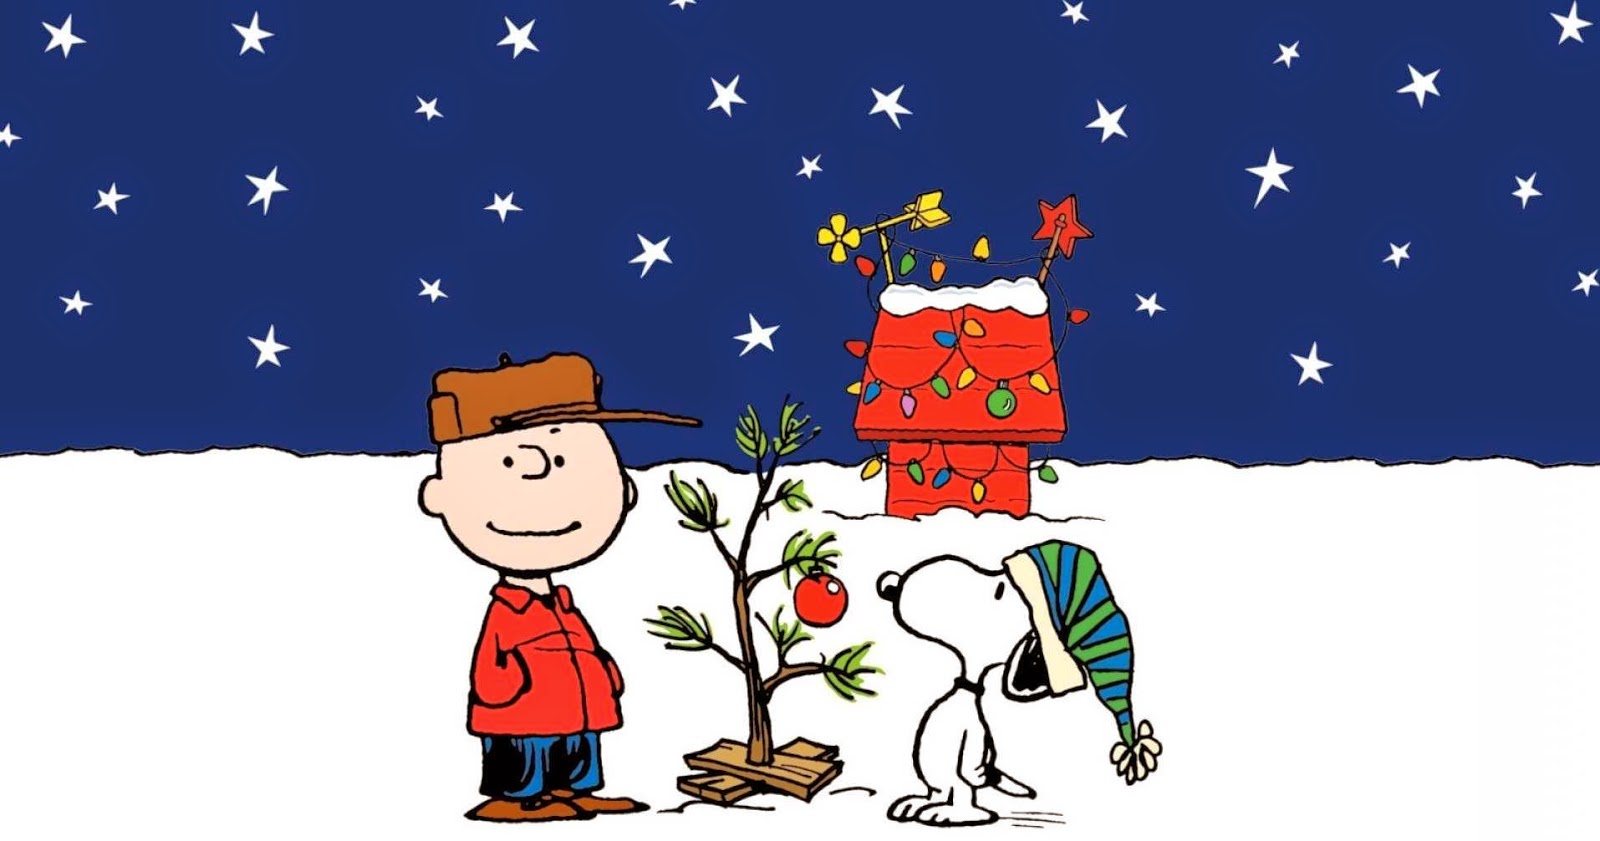 Coloring Pages: Charlie Brown Christmas Coloring Pages and Clip Art